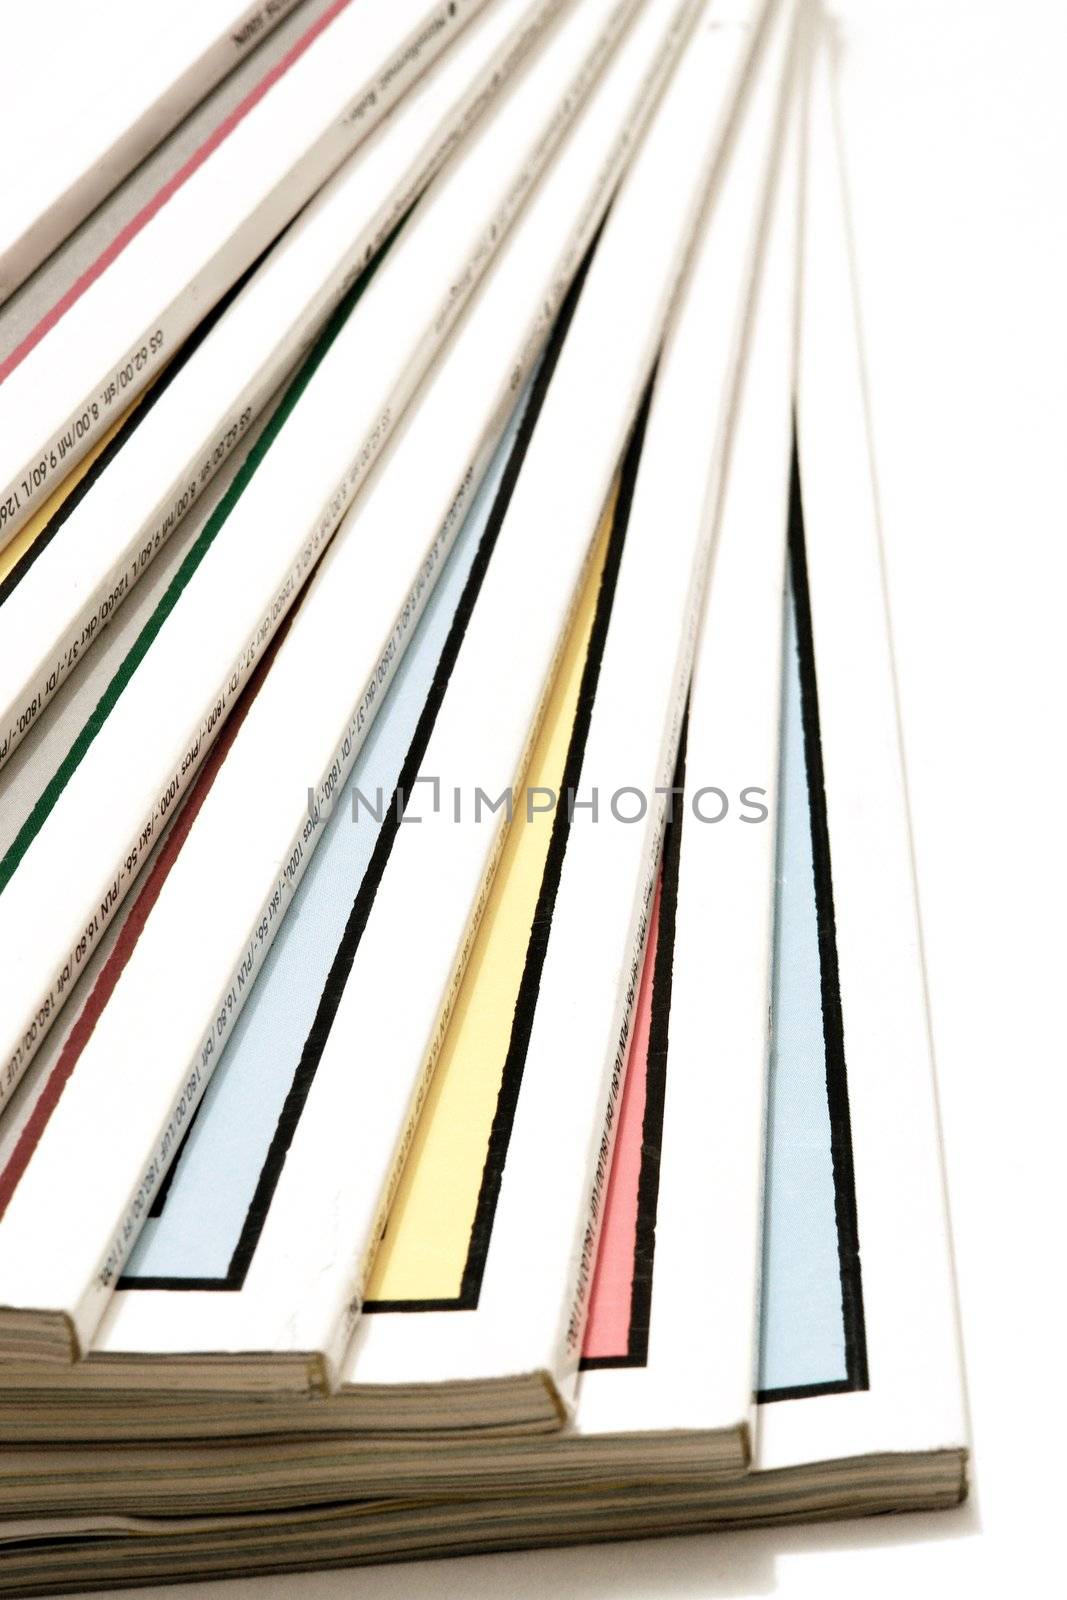 All names and logos are removed the rest of text is just the price of the magazine in differnt currencies!.close-up of magazines/newspapers on a white background.